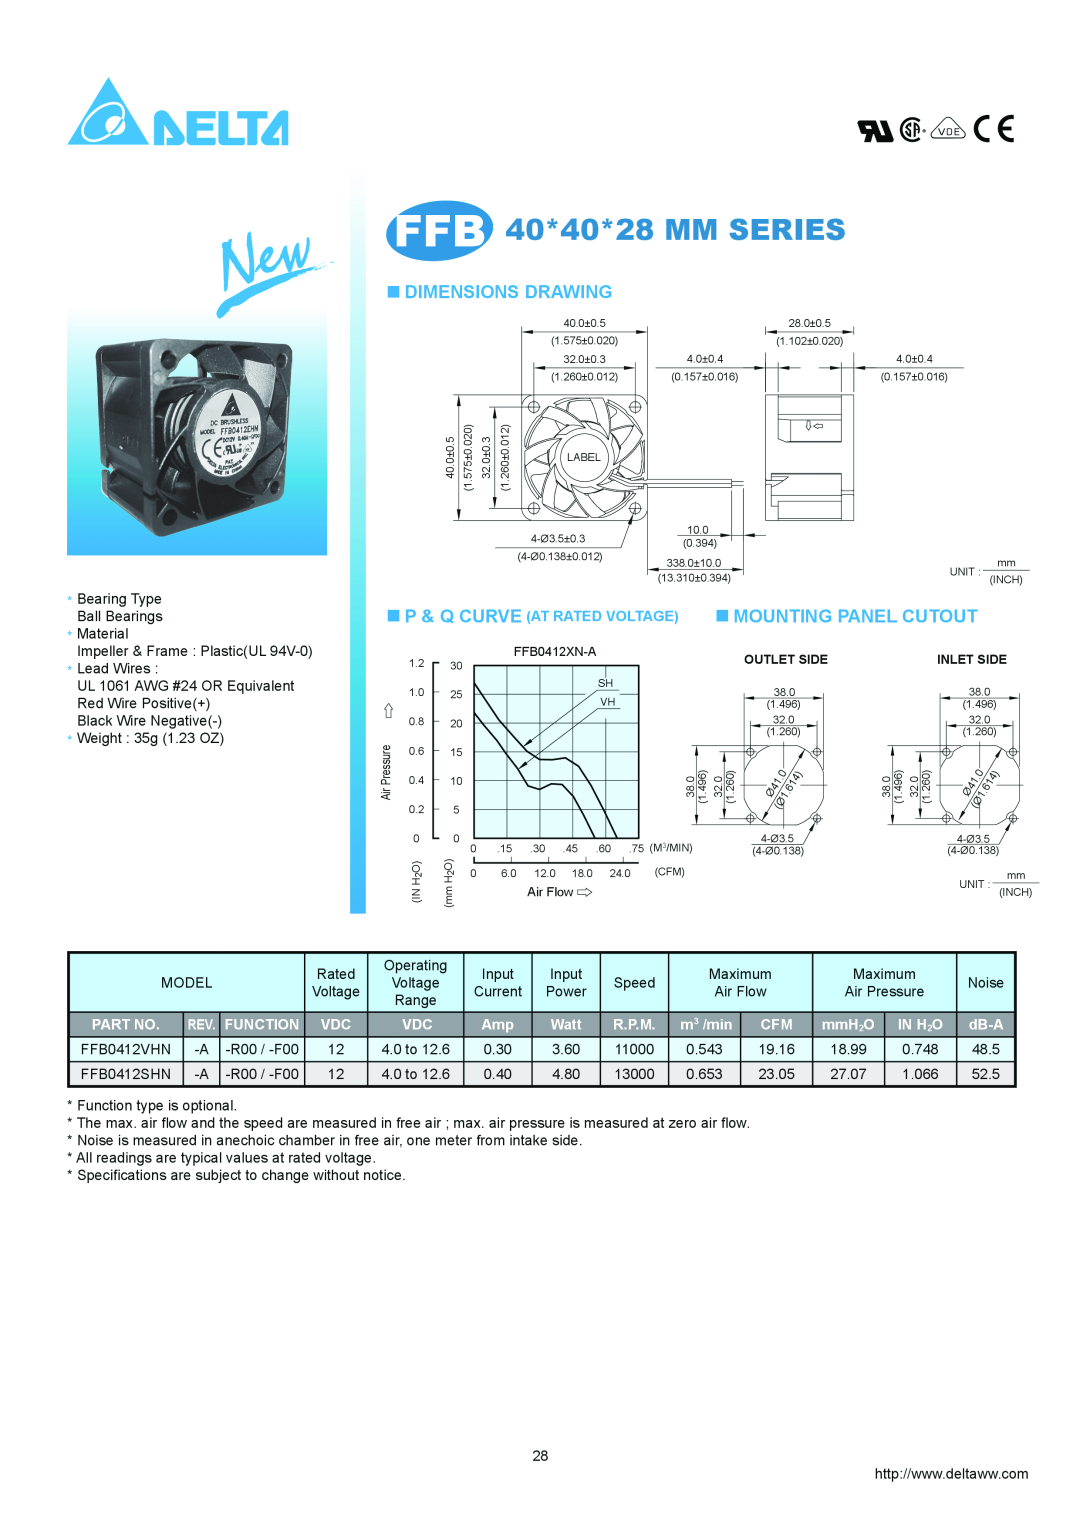 Delta Electronics FFB0412GHN, FFB0412UHN dimensions FFB 40*40*28 MM SERIES, Dimensions Drawing, Function, R.P.M, IN H2O 